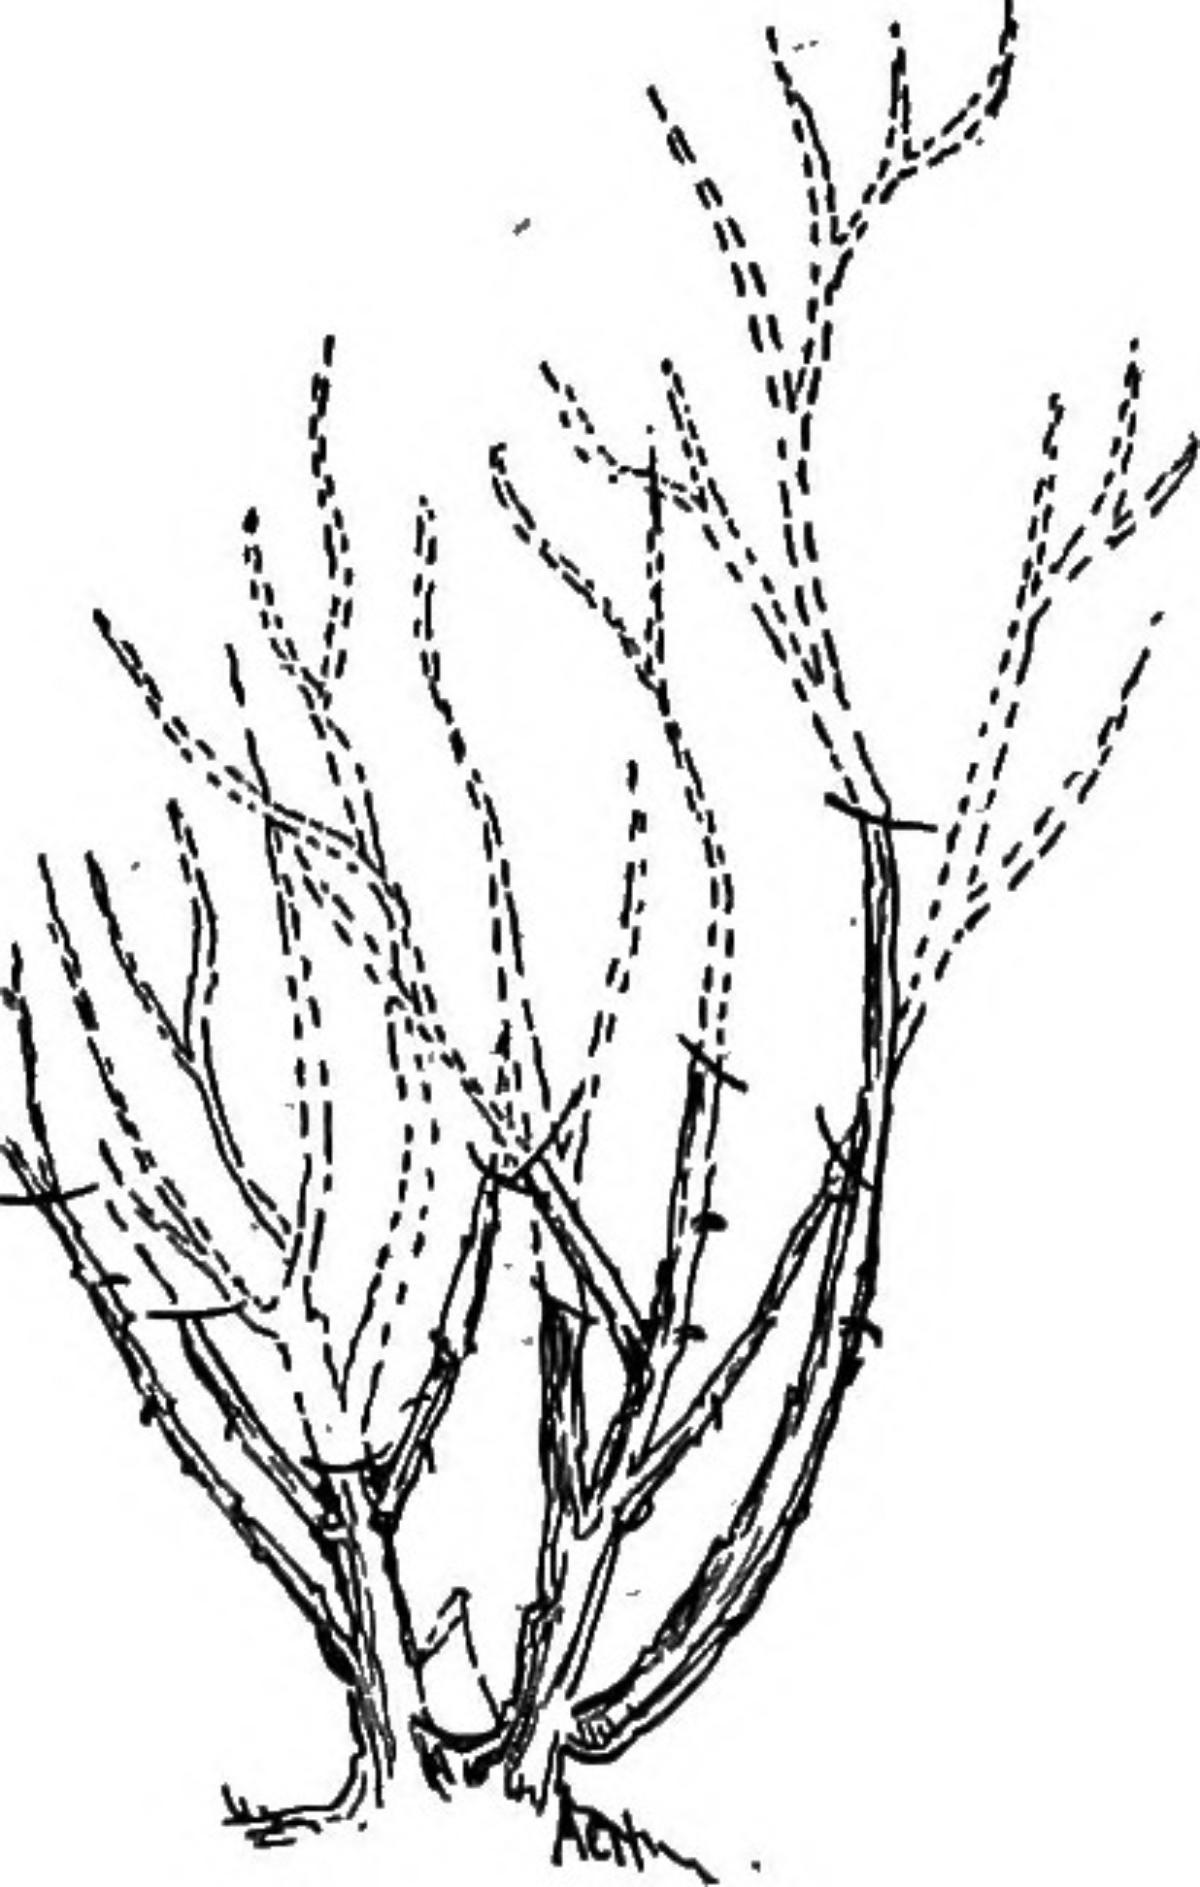 Illustration of how to prune a rose bush